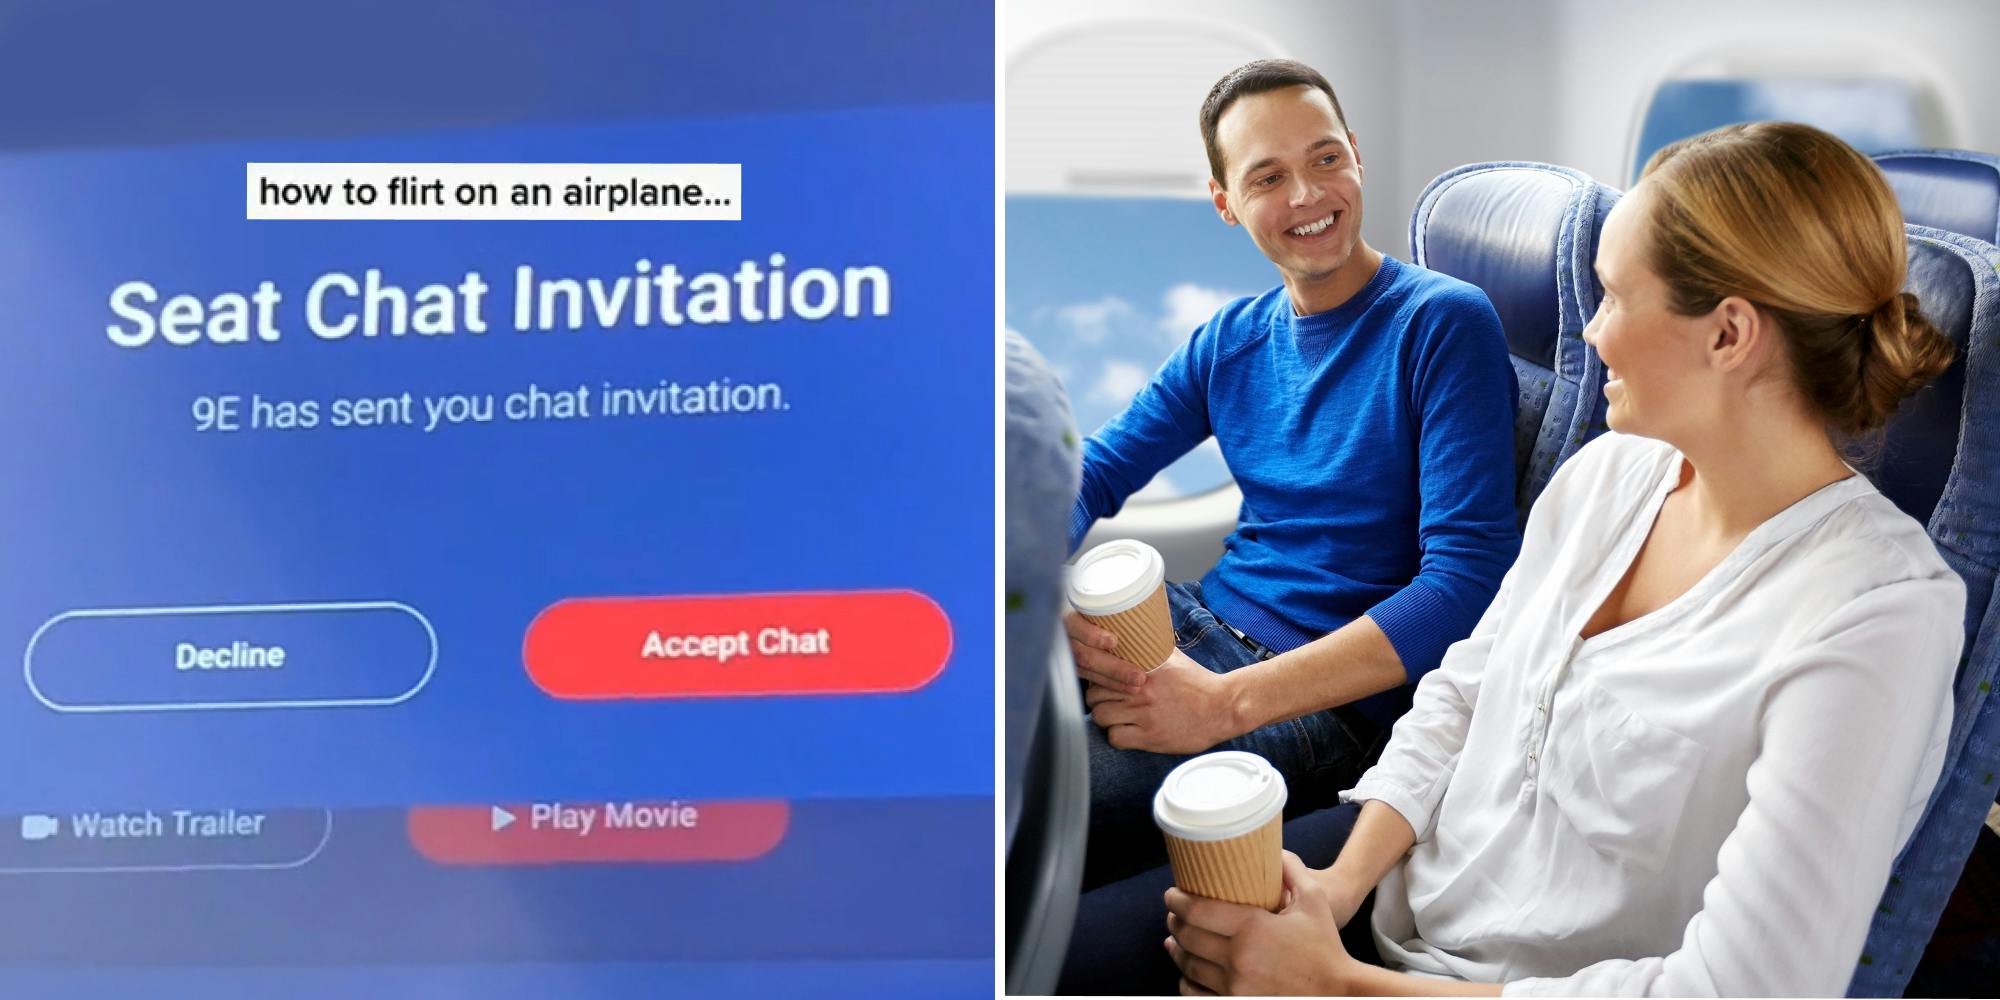 Airplane seat screen "Seat Chat Invitation 9E has sent you a chat invitation decline accept" caption "how to flirt on an airplane" (l) man and woman sitting on plane talking coffee in hands (r)